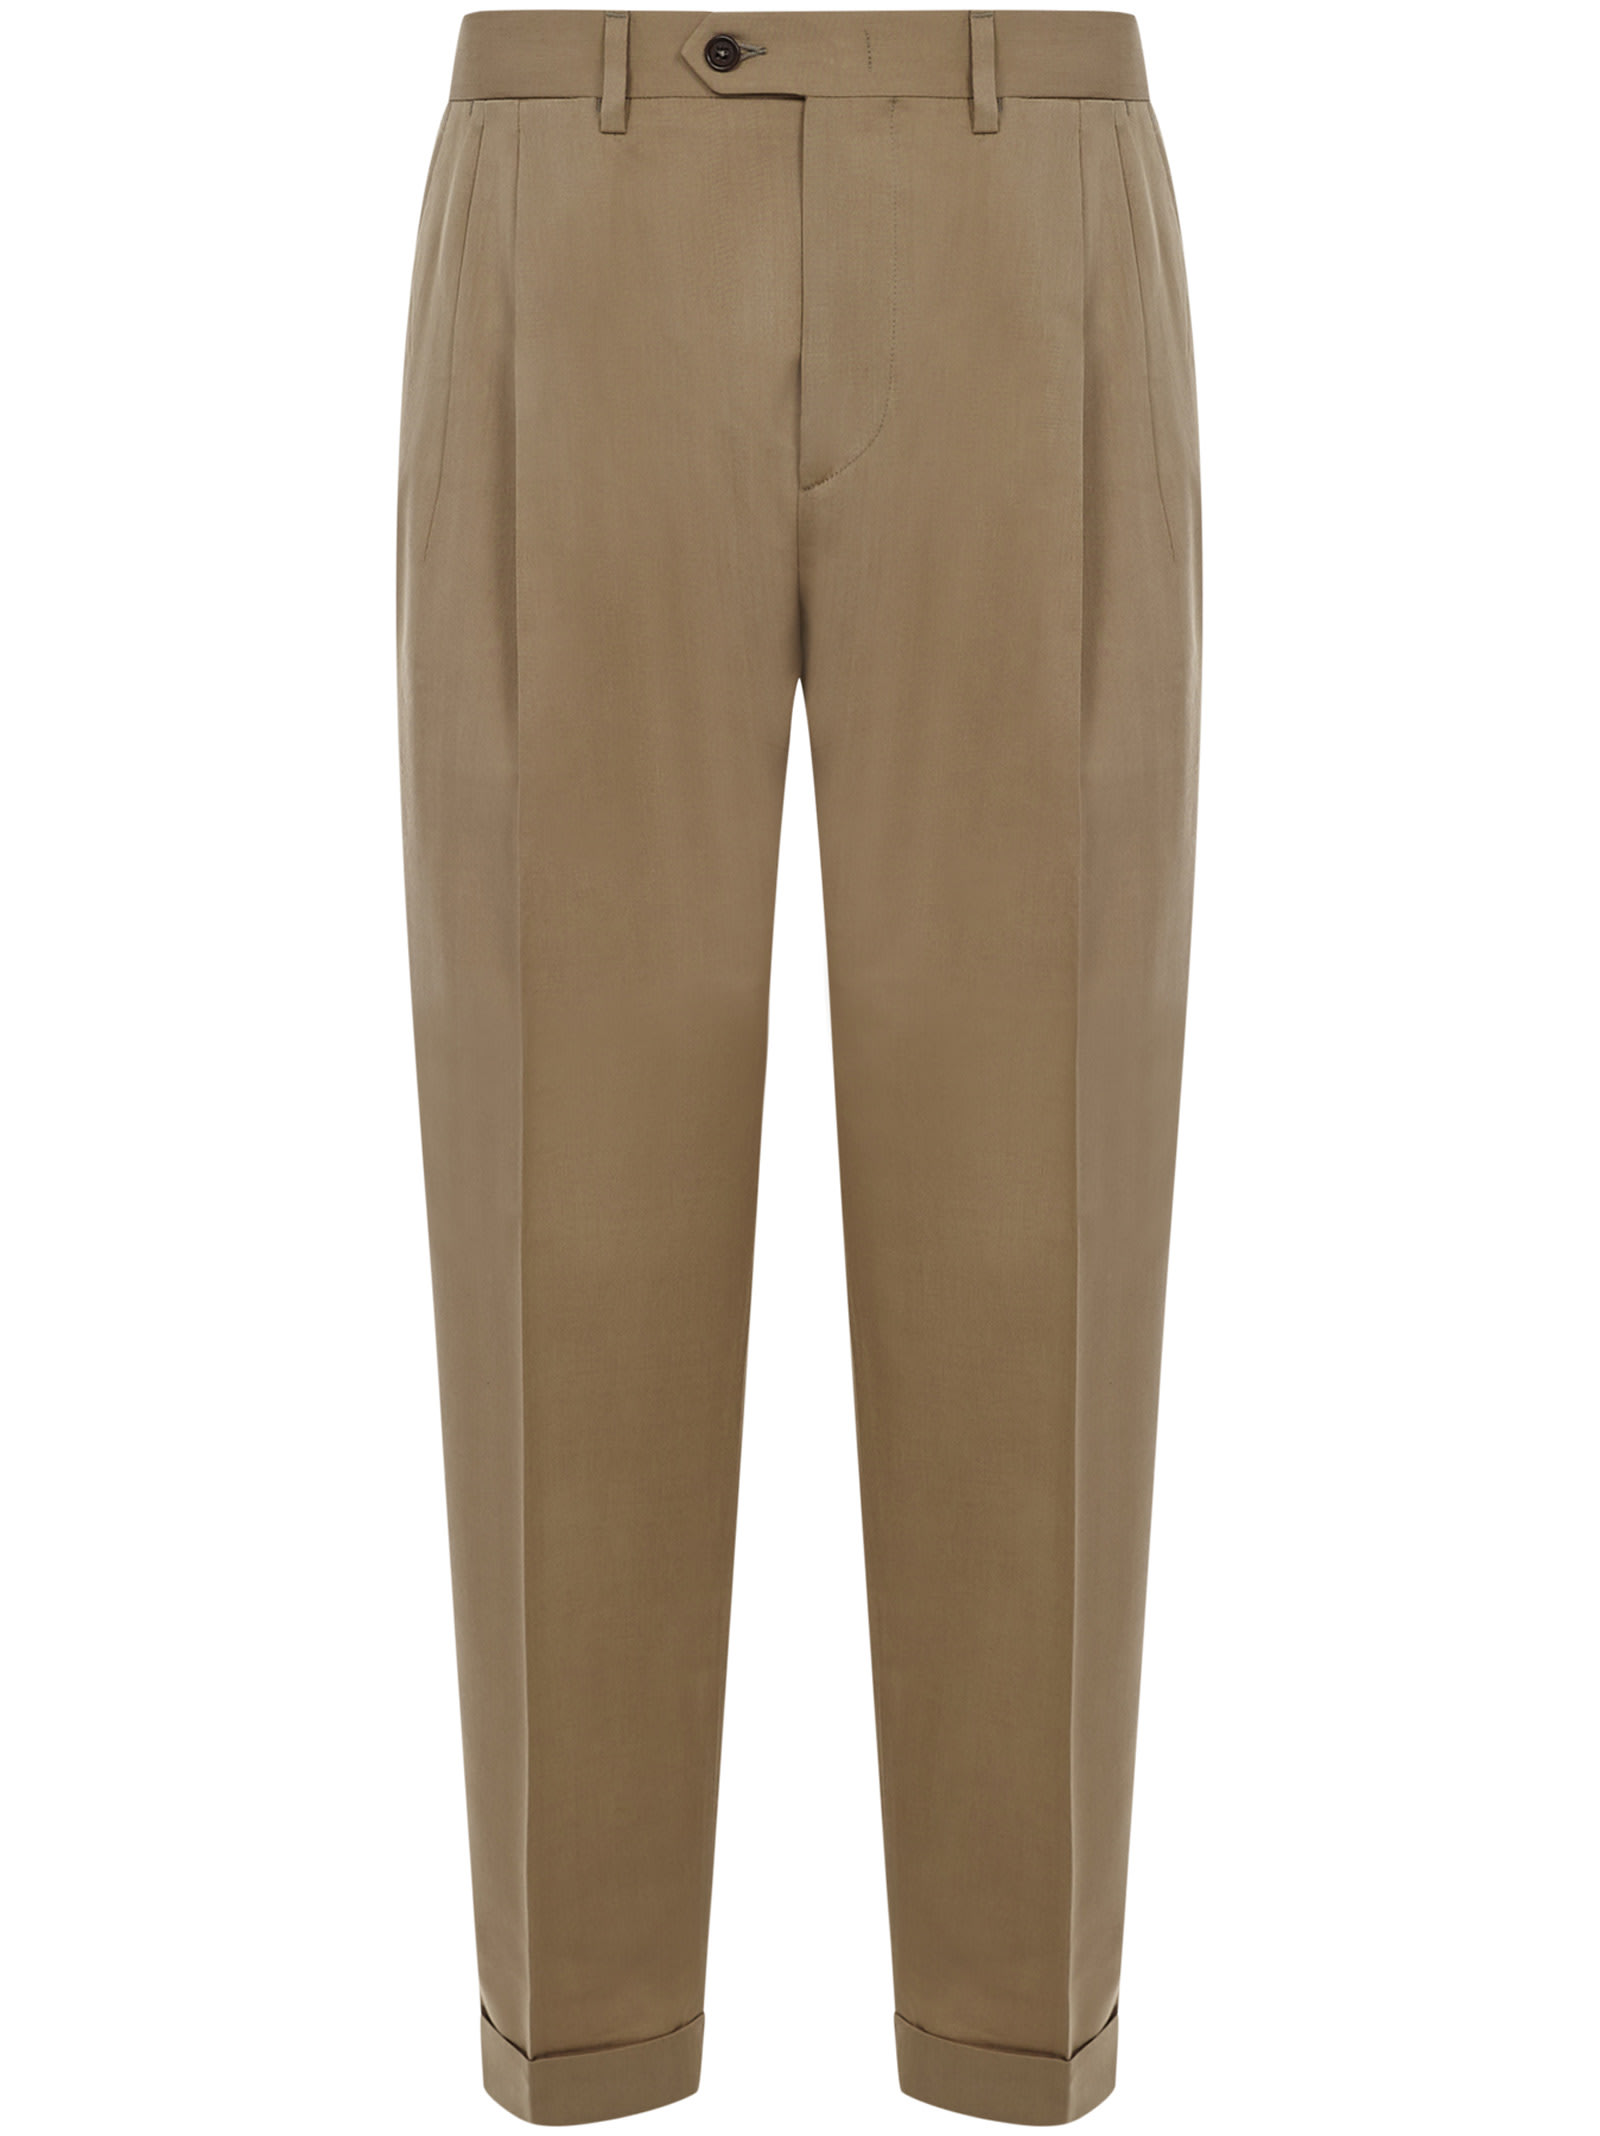 BE ABLE TROUSER,3450 BEIGE